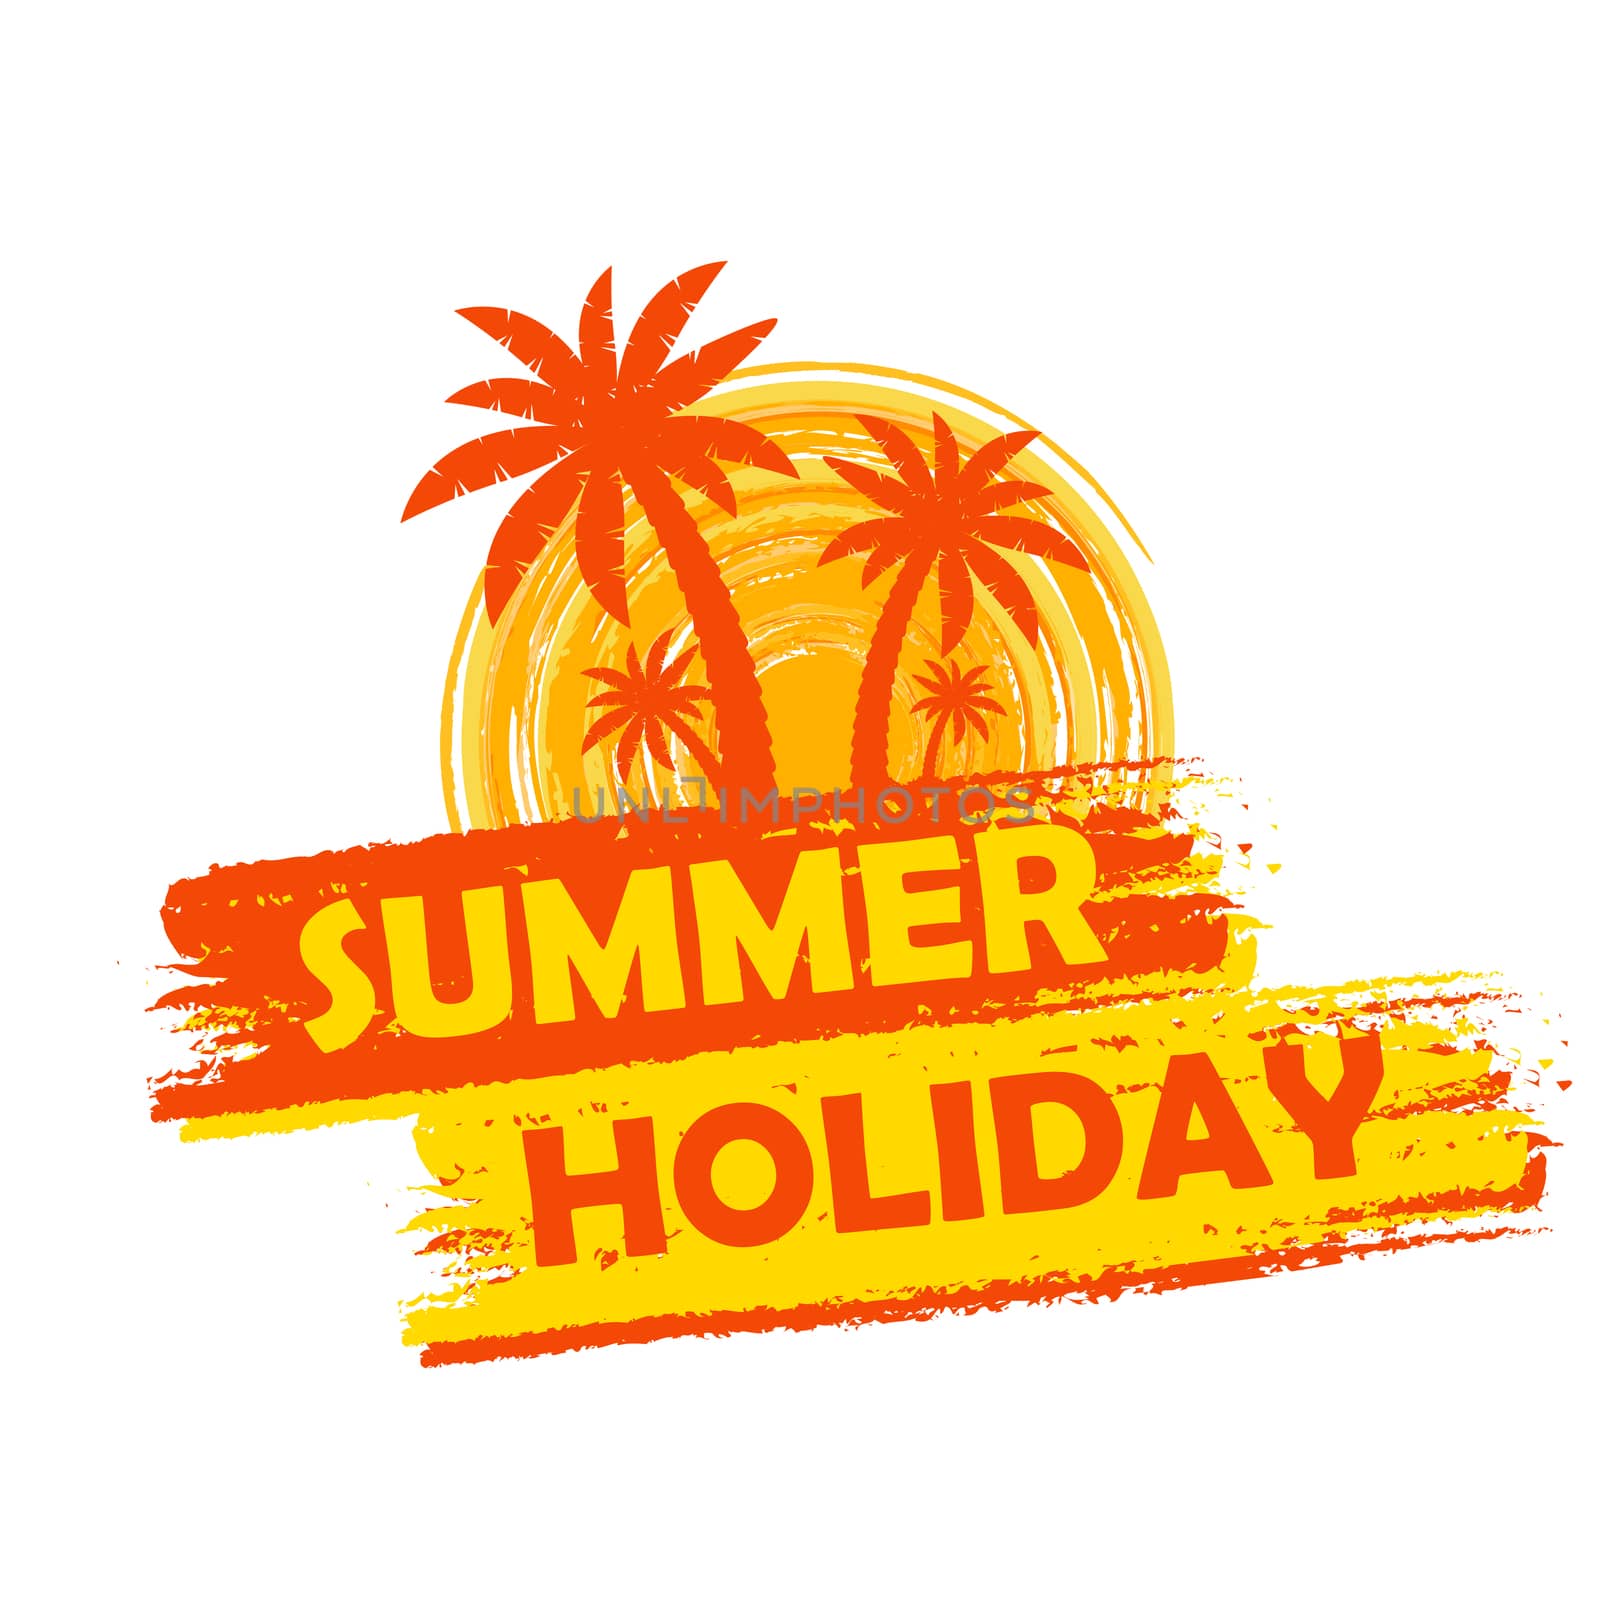 summer holiday banner - text in yellow and orange drawn label with palms and sun symbol, holiday seasonal concept